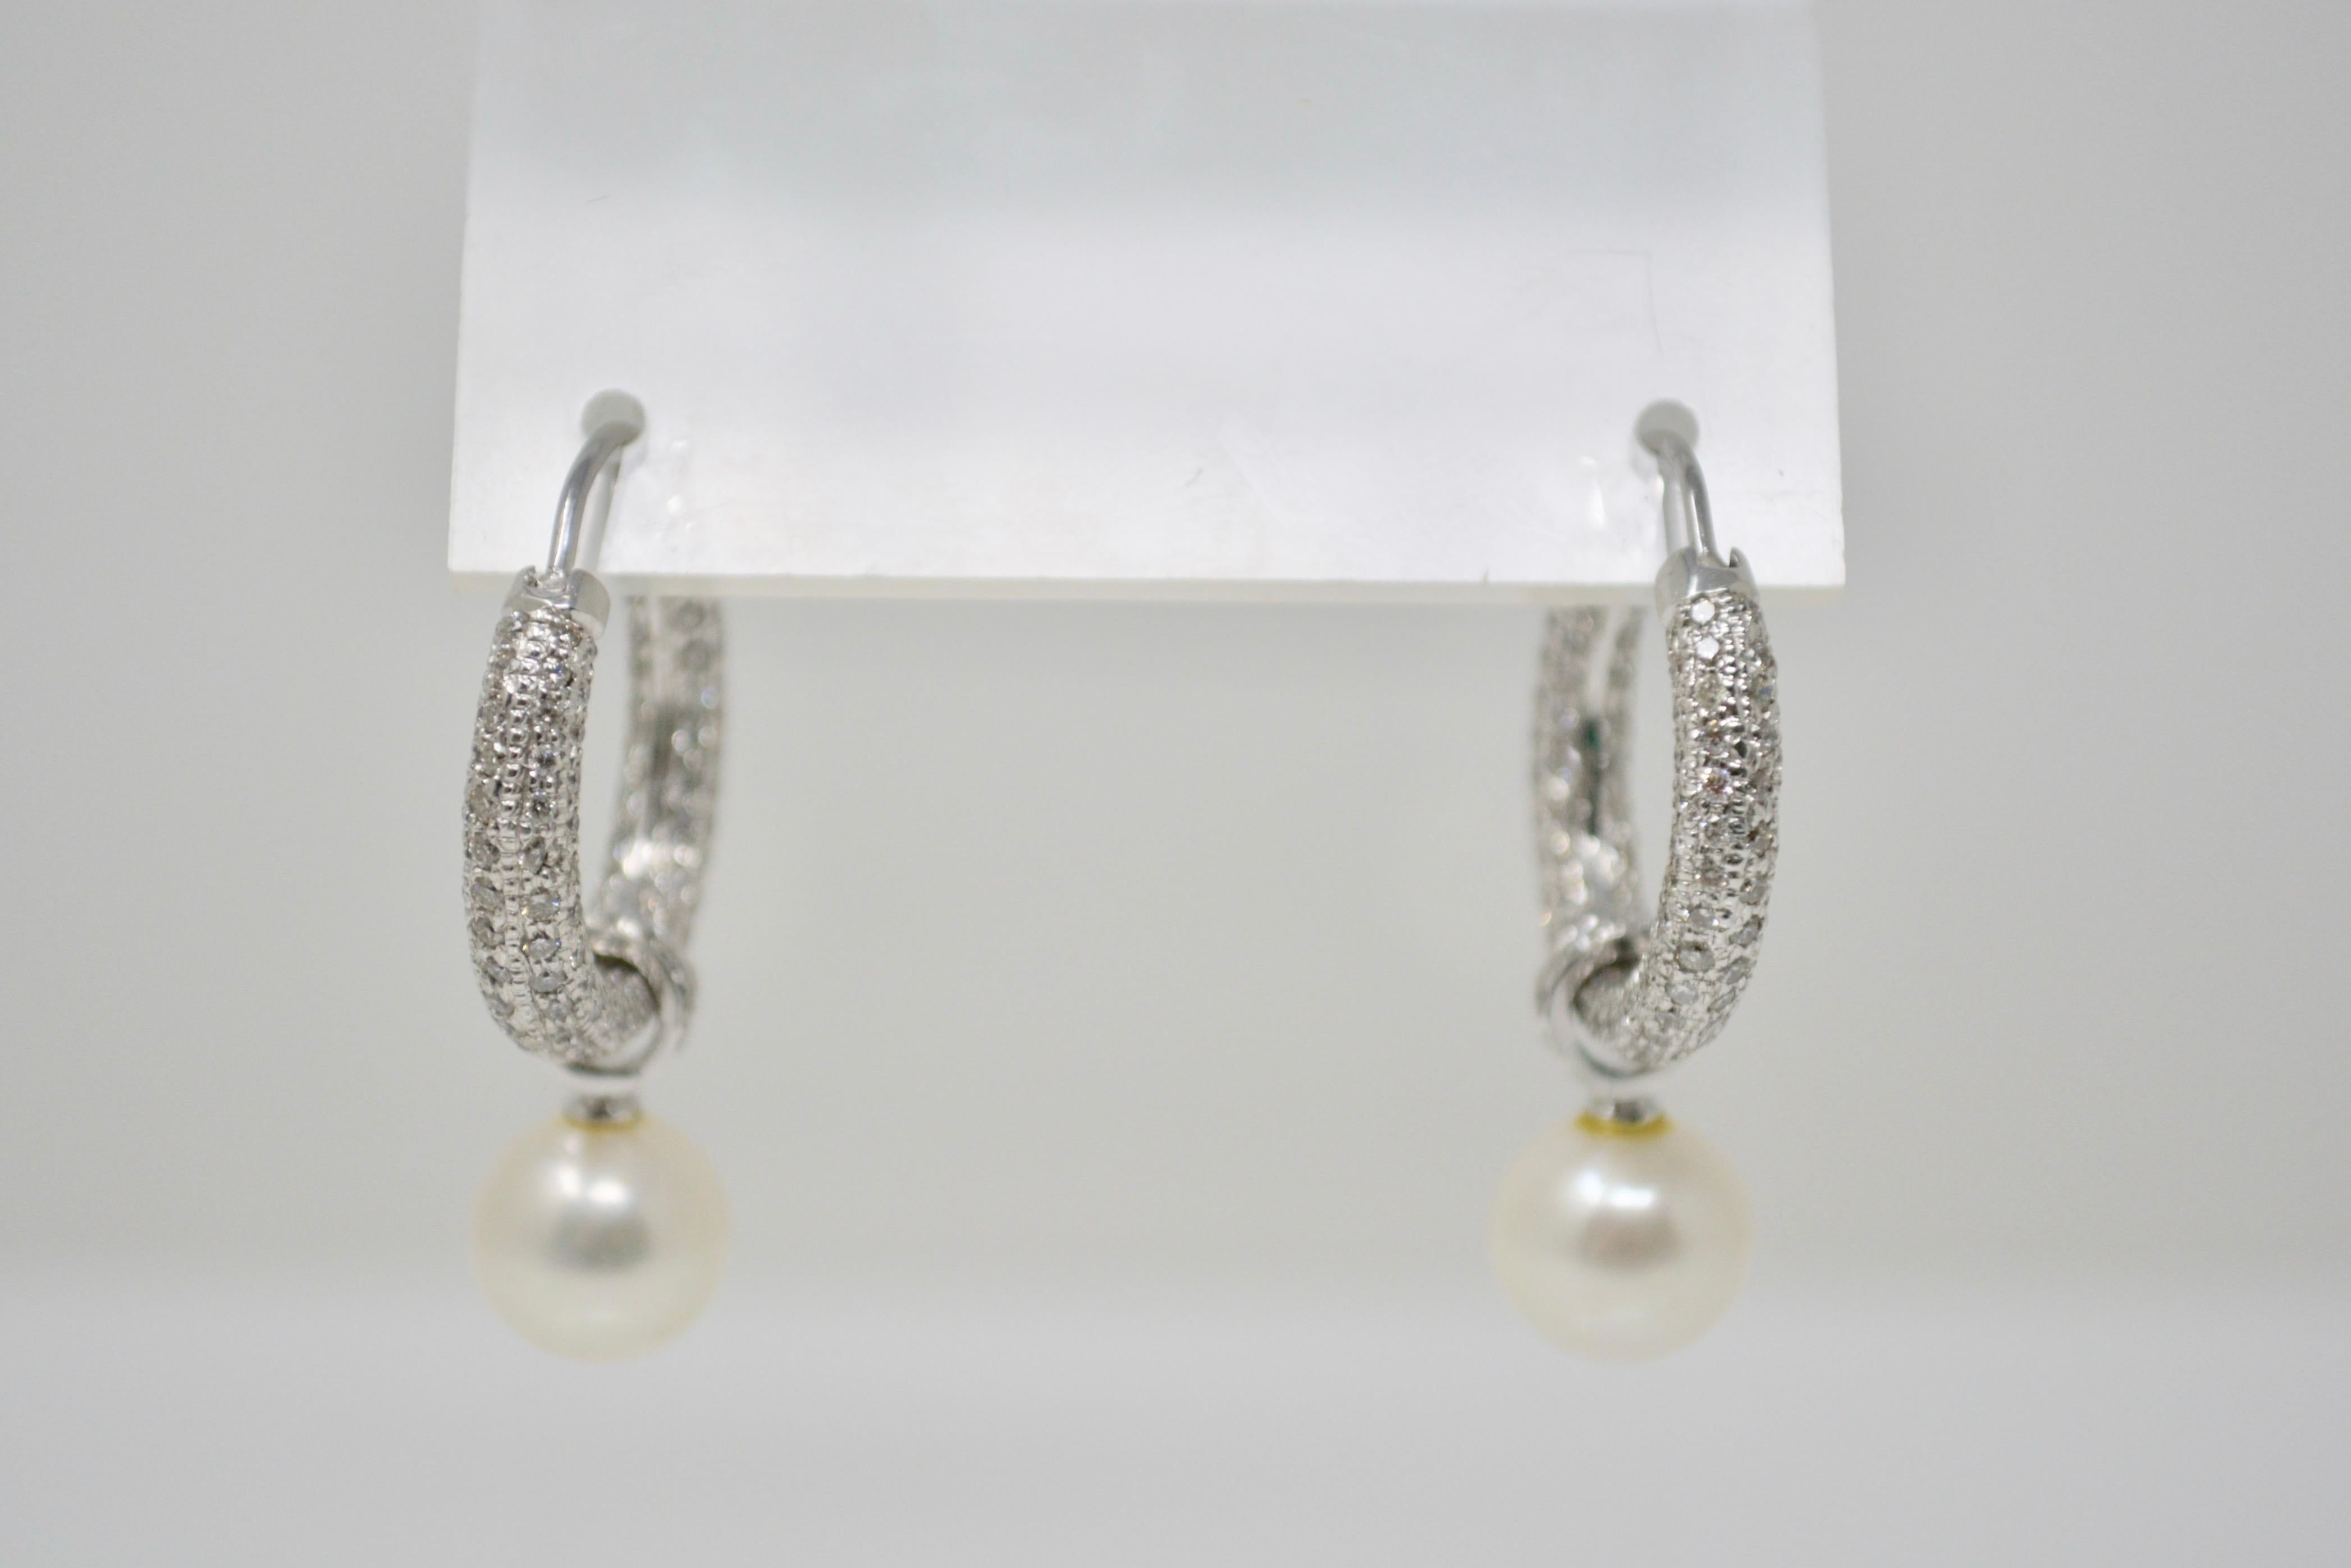 The pave set diamond hoop earrings with detachable diamond and south sea pearl drop weighs 3 carat total weight and the pearls are 9.8mm. Earrings can be worn with or without pearl. Pearls are a silver white with have a nice luster. These beautiful